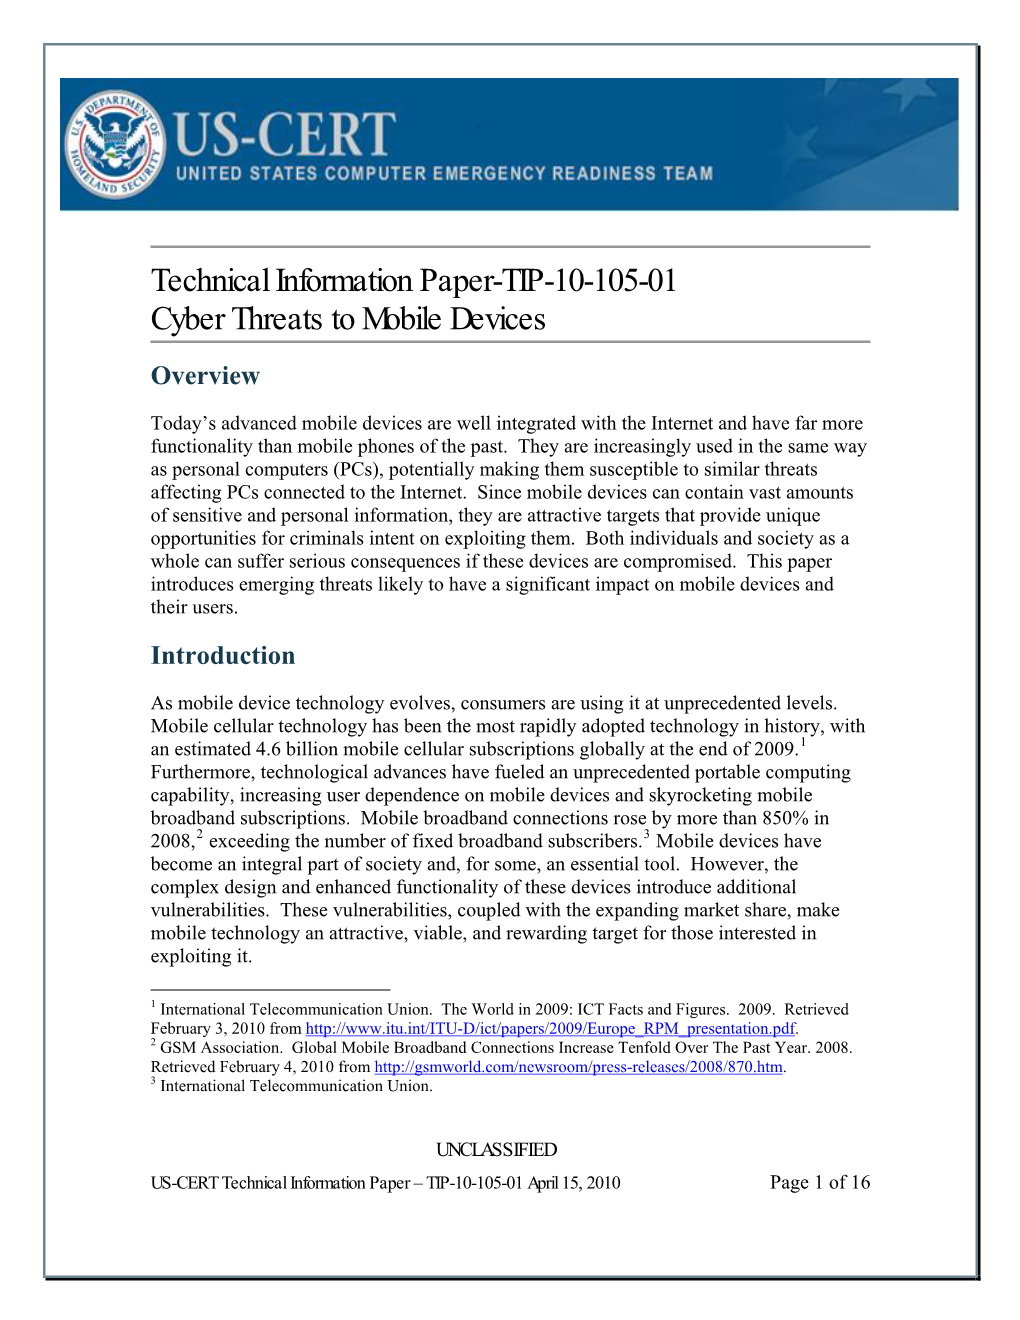 Cyber Threats to Mobile Devices